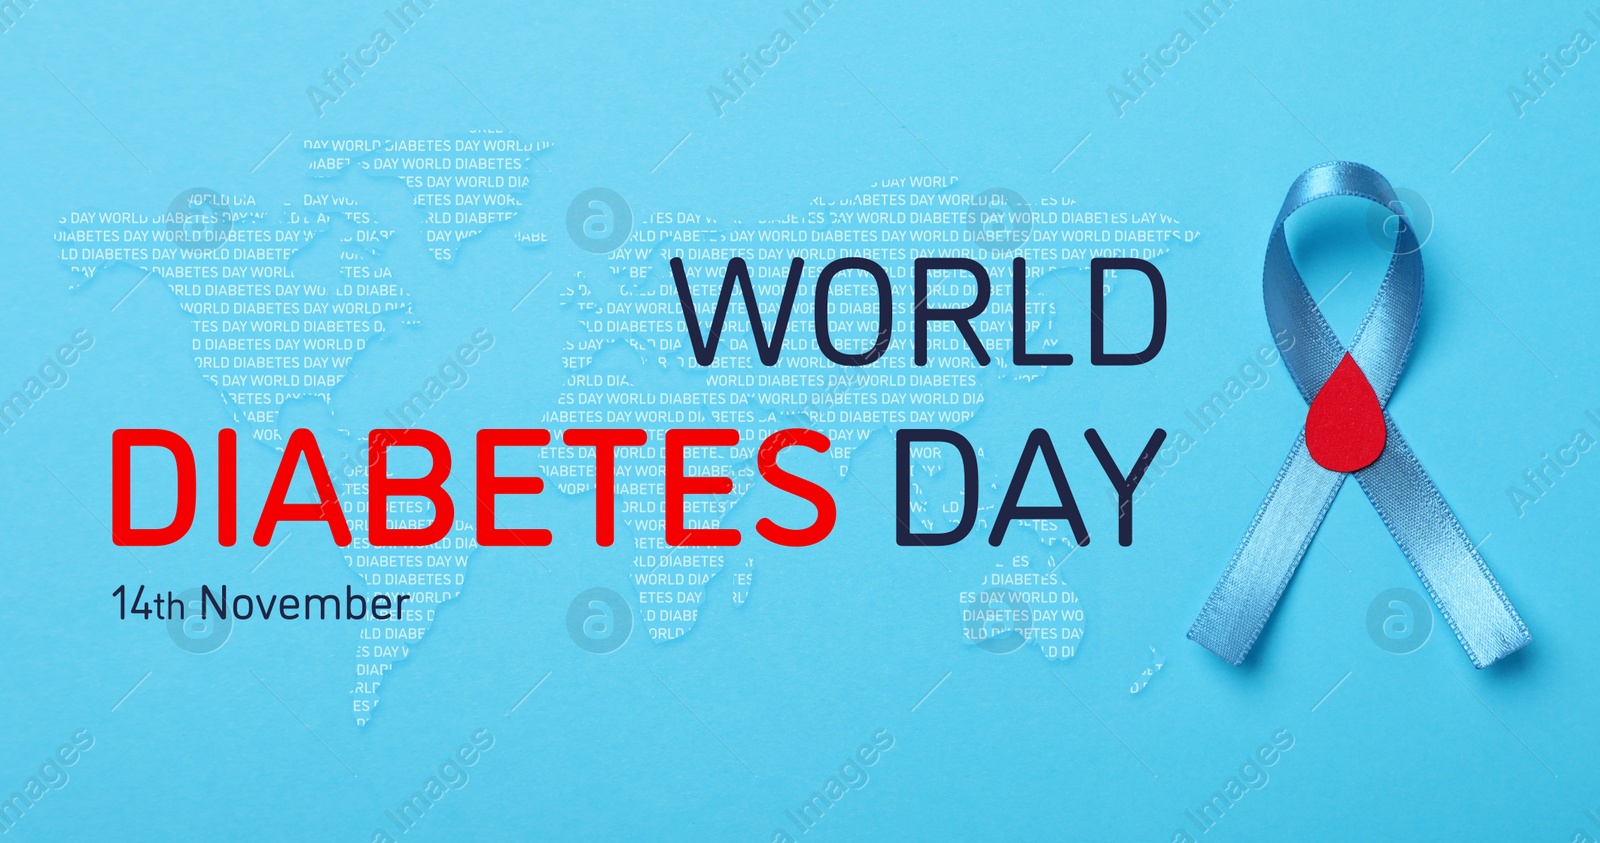 Image of World Diabetes Day, banner design. Light blue ribbon with paper blood drop, top view. Illustration of world map on color background